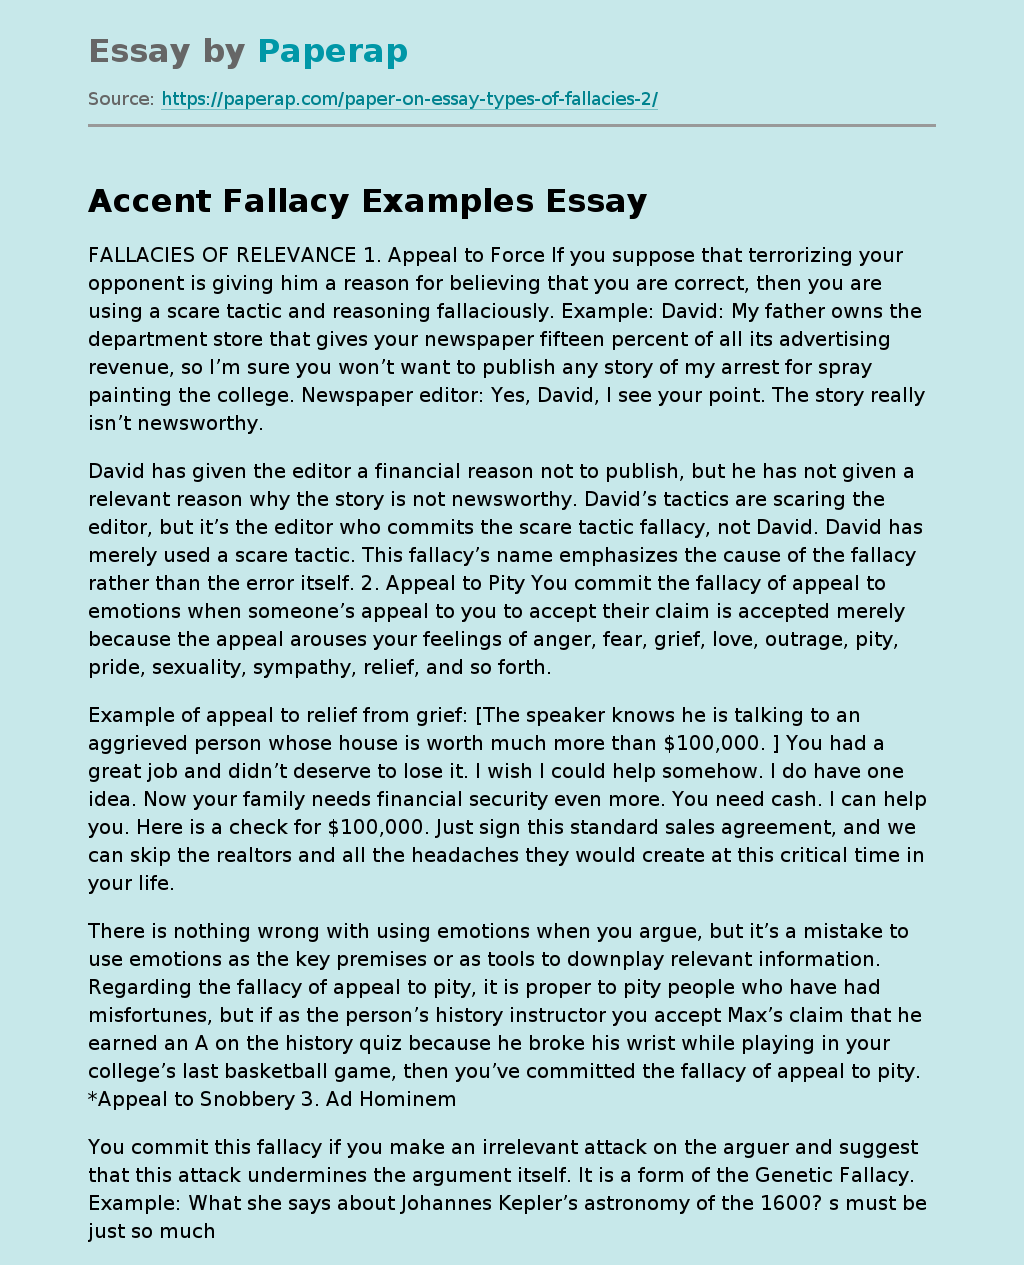 Accent Fallacy Examples